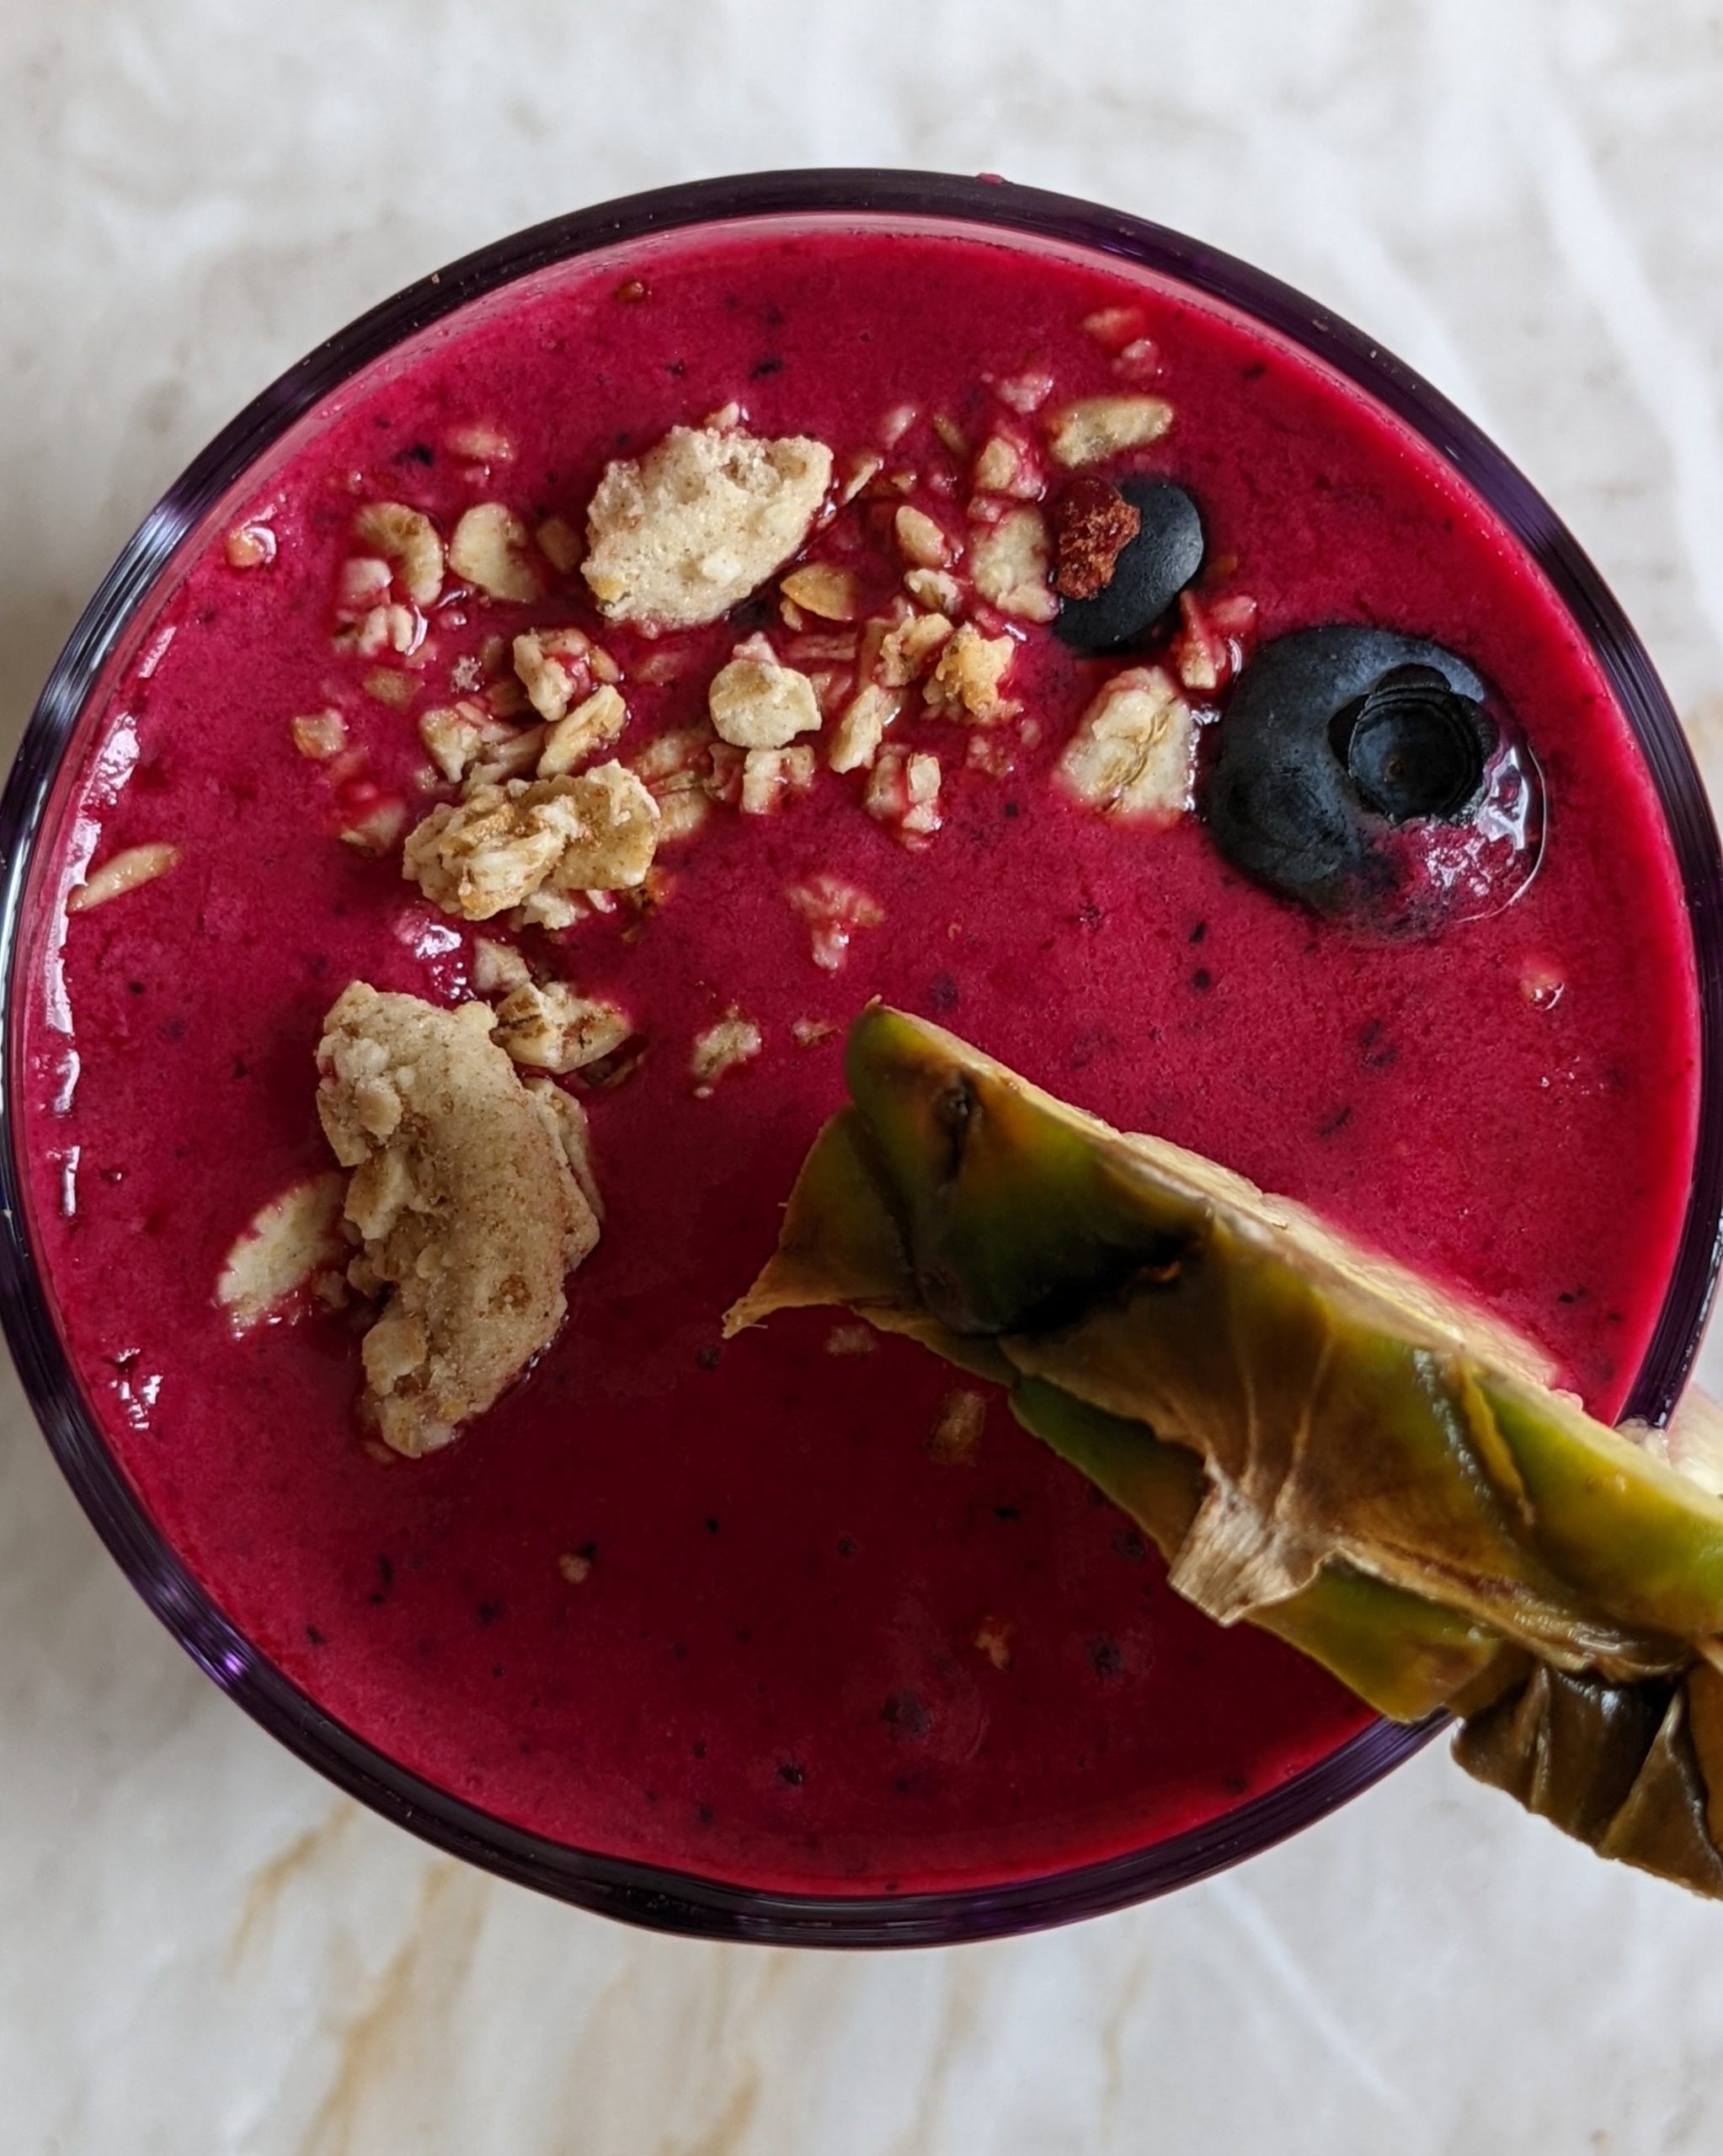 ginger-recipes-beetroot-pineapple-blueberry-and-ginger-antioxidant-boost-summer-pink-smoothie-recipe-easy-breakfast-weight-loss-recipe